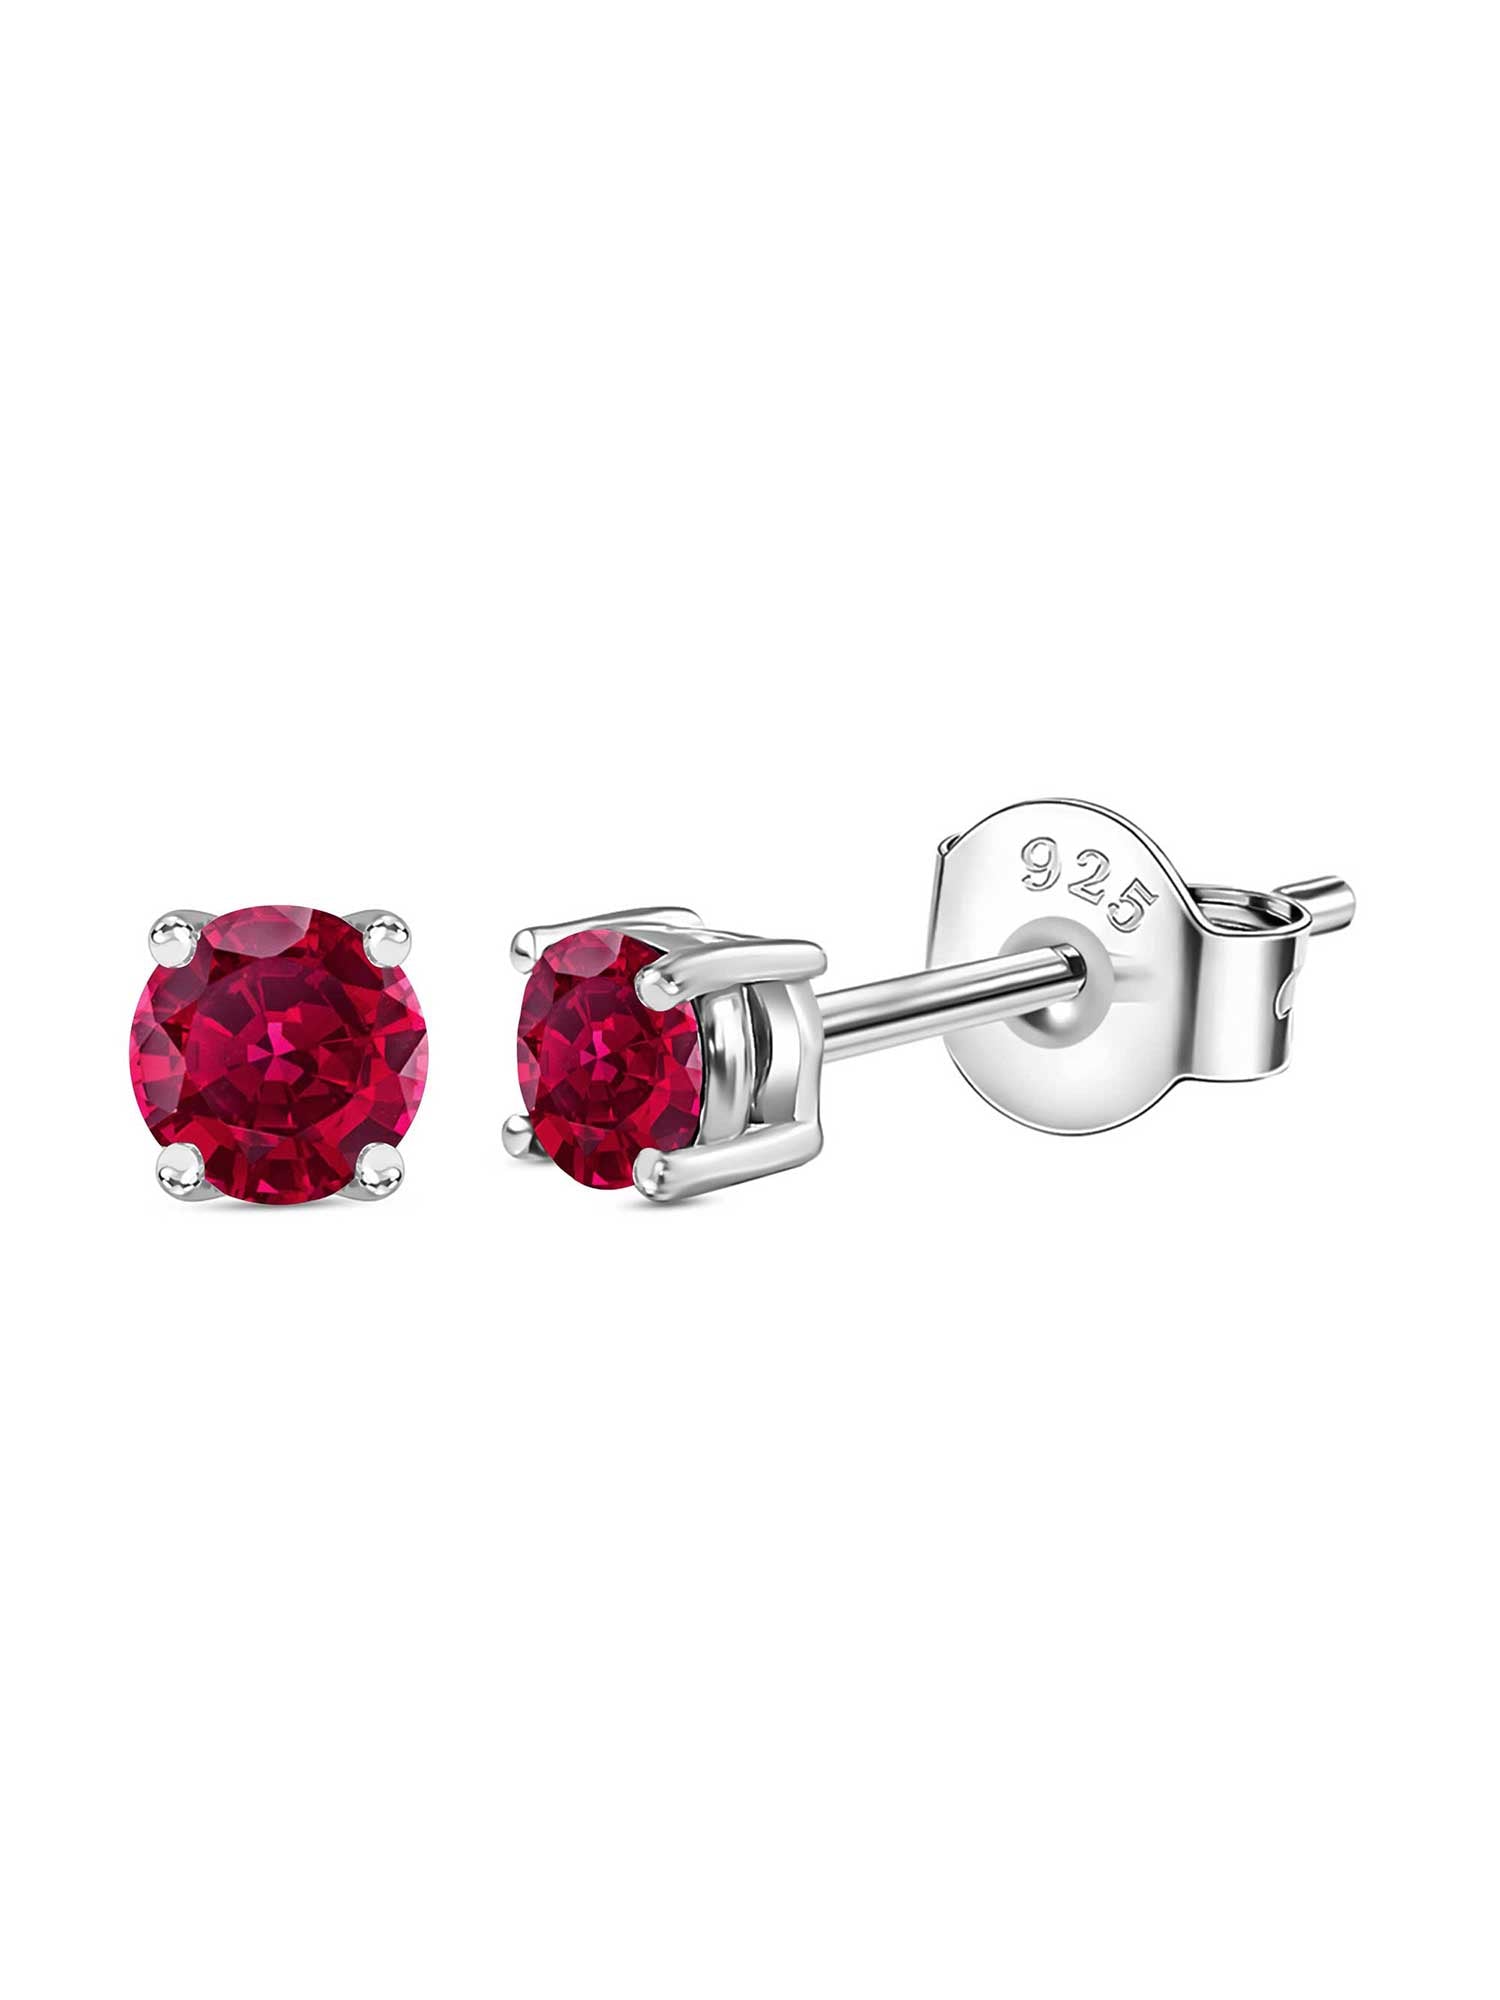 Red Ruby Half Carat Solitaire Stud Earrings For Women-2